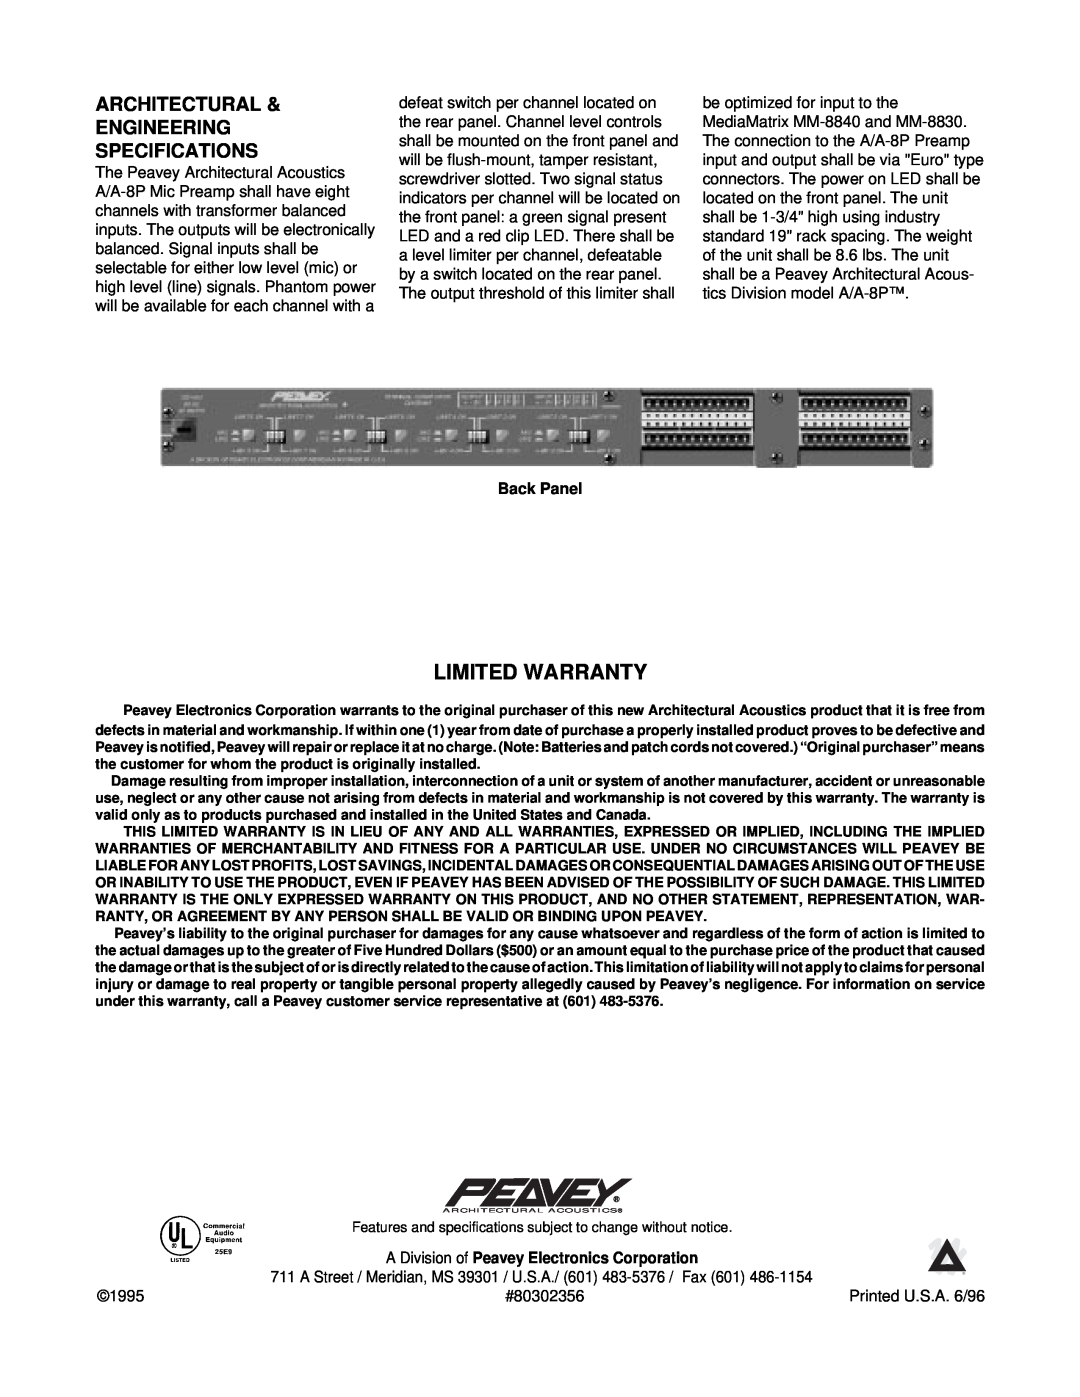 Peavey A/A-8P specifications Architectural & Engineering Specifications, Limited Warranty 